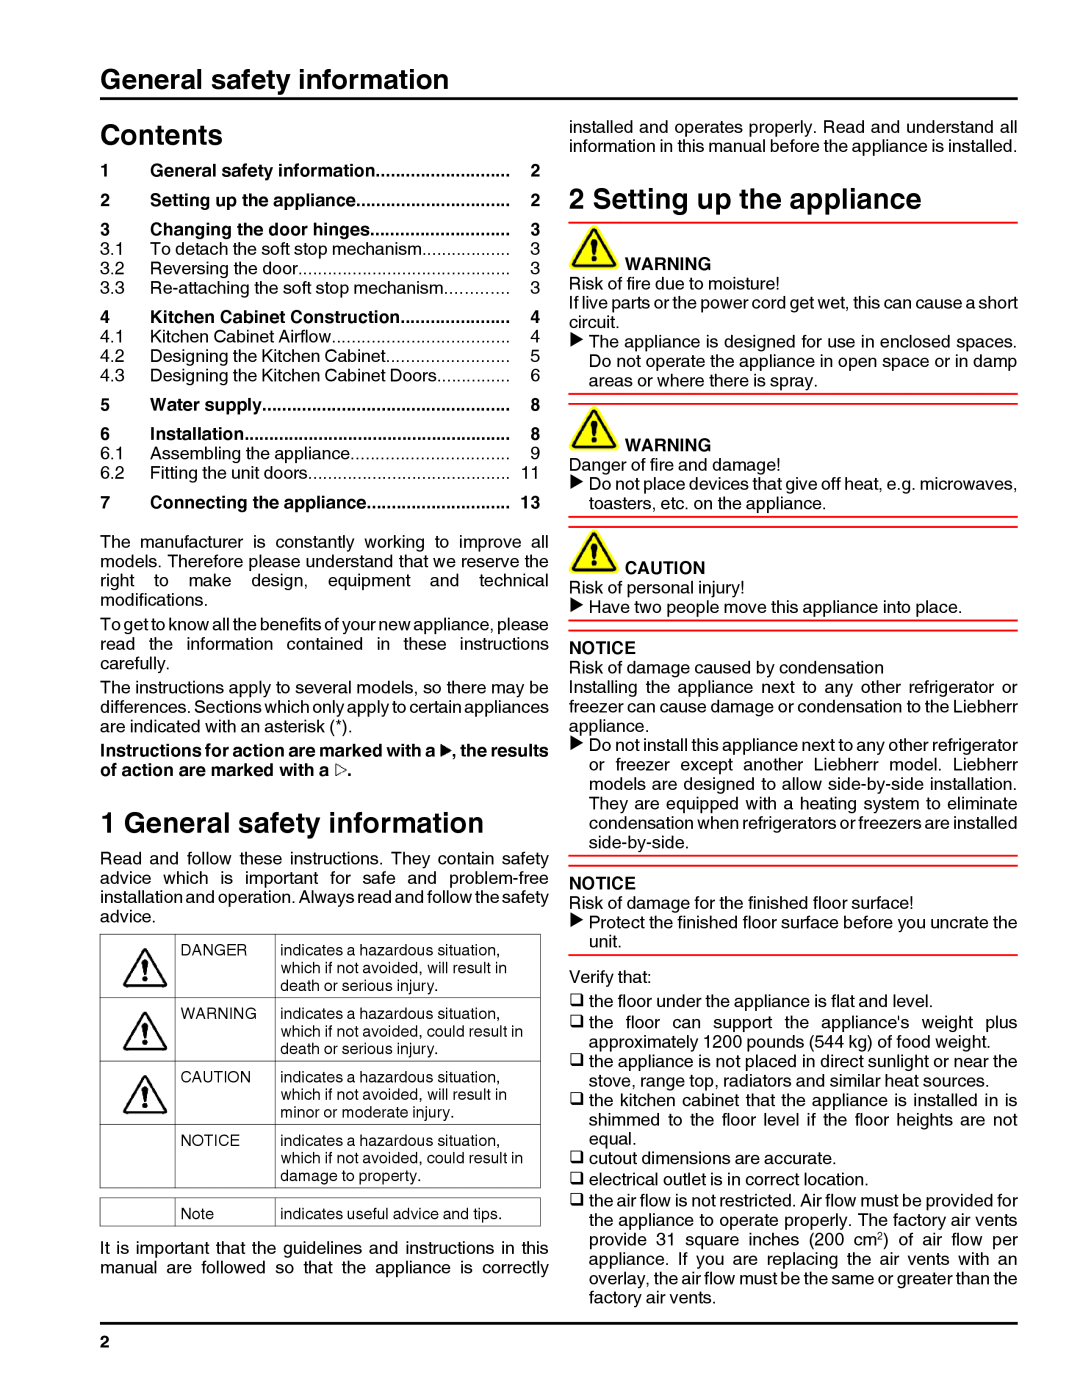 Liebherr 7084000-01, HC 1011/1060 General safety information, Contents, Setting up the appliance, Changing the door hinges 